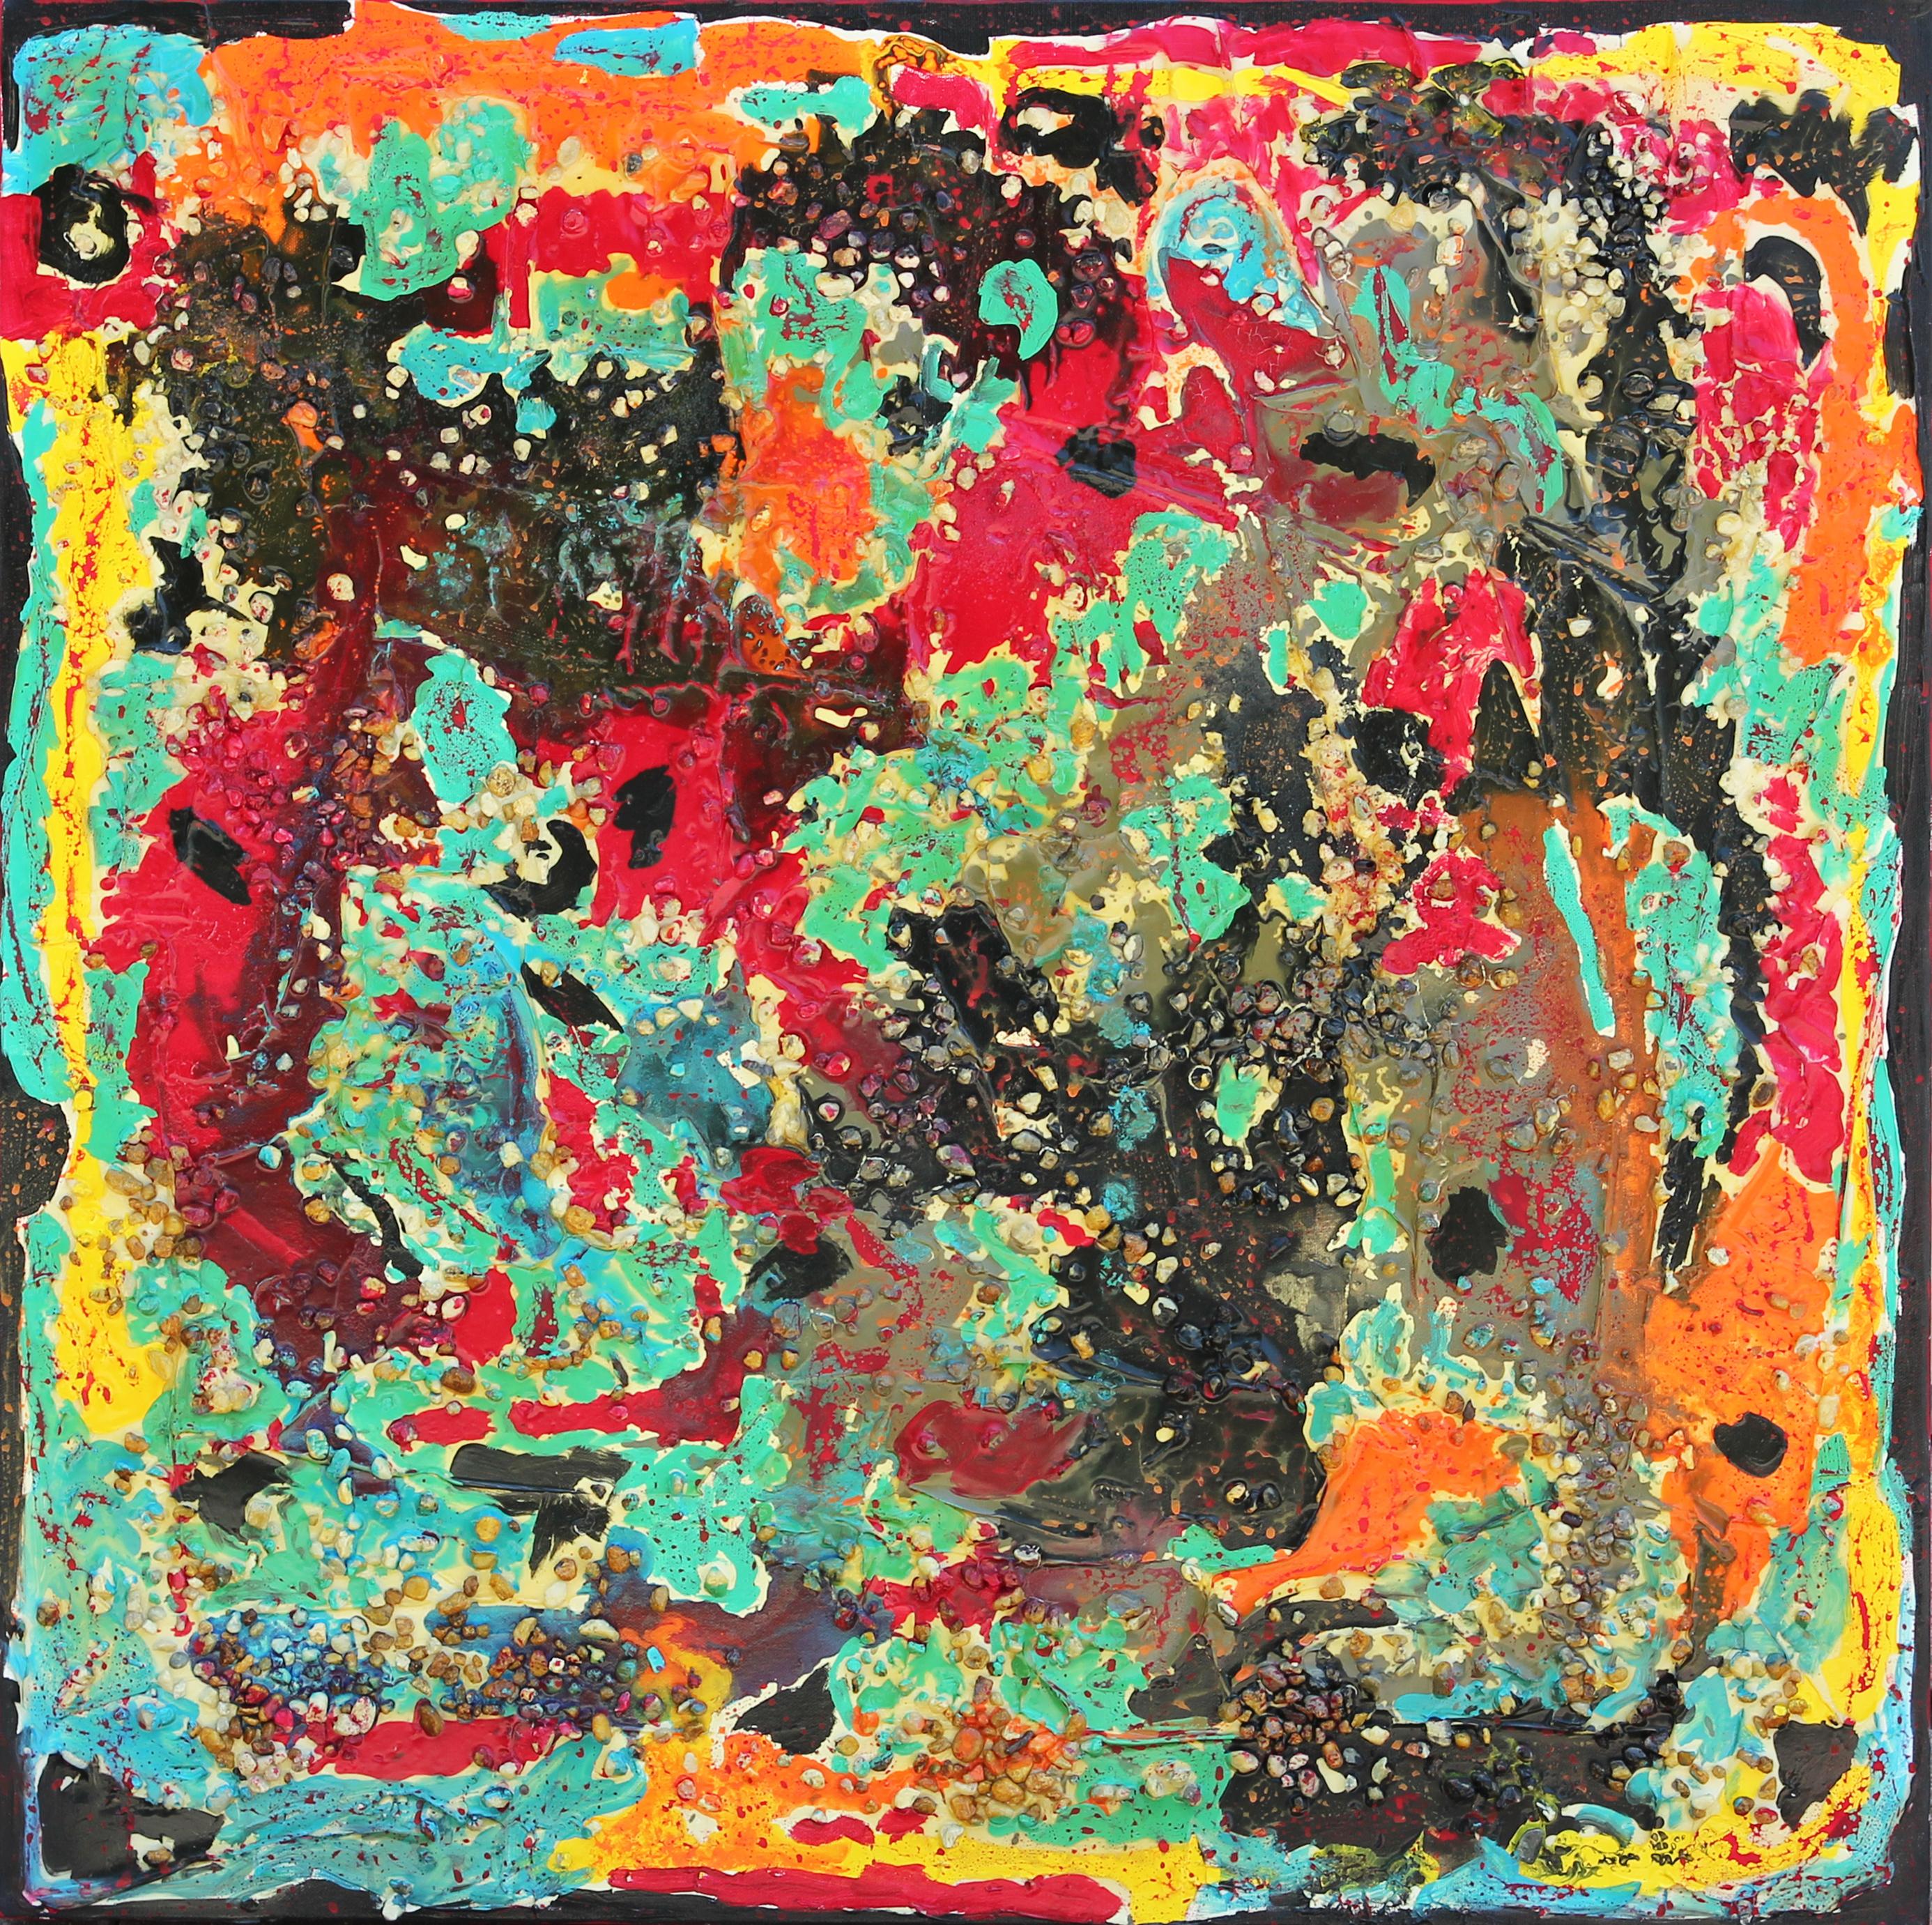 "Ramshackle" Green, Red, Turquoise, and Orange Abstract with Pebbles